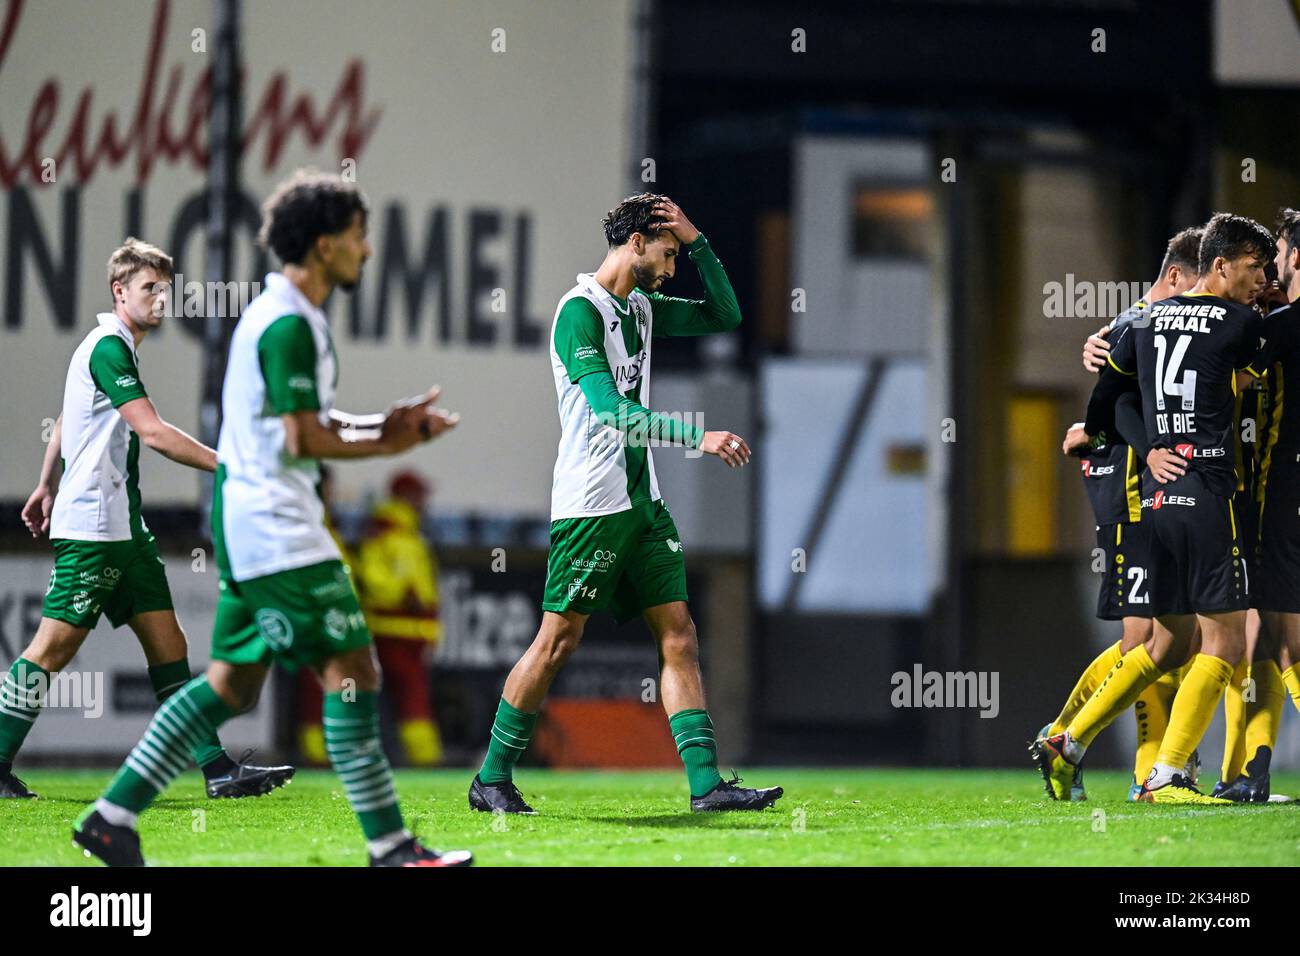 Racing's Sabri Hmouda shows defeat during a soccer game between Lierse Kempenzonen and Koninklijke Racing Club Mechelen, Saturday 24 September 2022 in Lier, in the fifth round of the 'Croky Cup' Belgian cup. BELGA PHOTO TOM GOYVAERTS Stock Photo